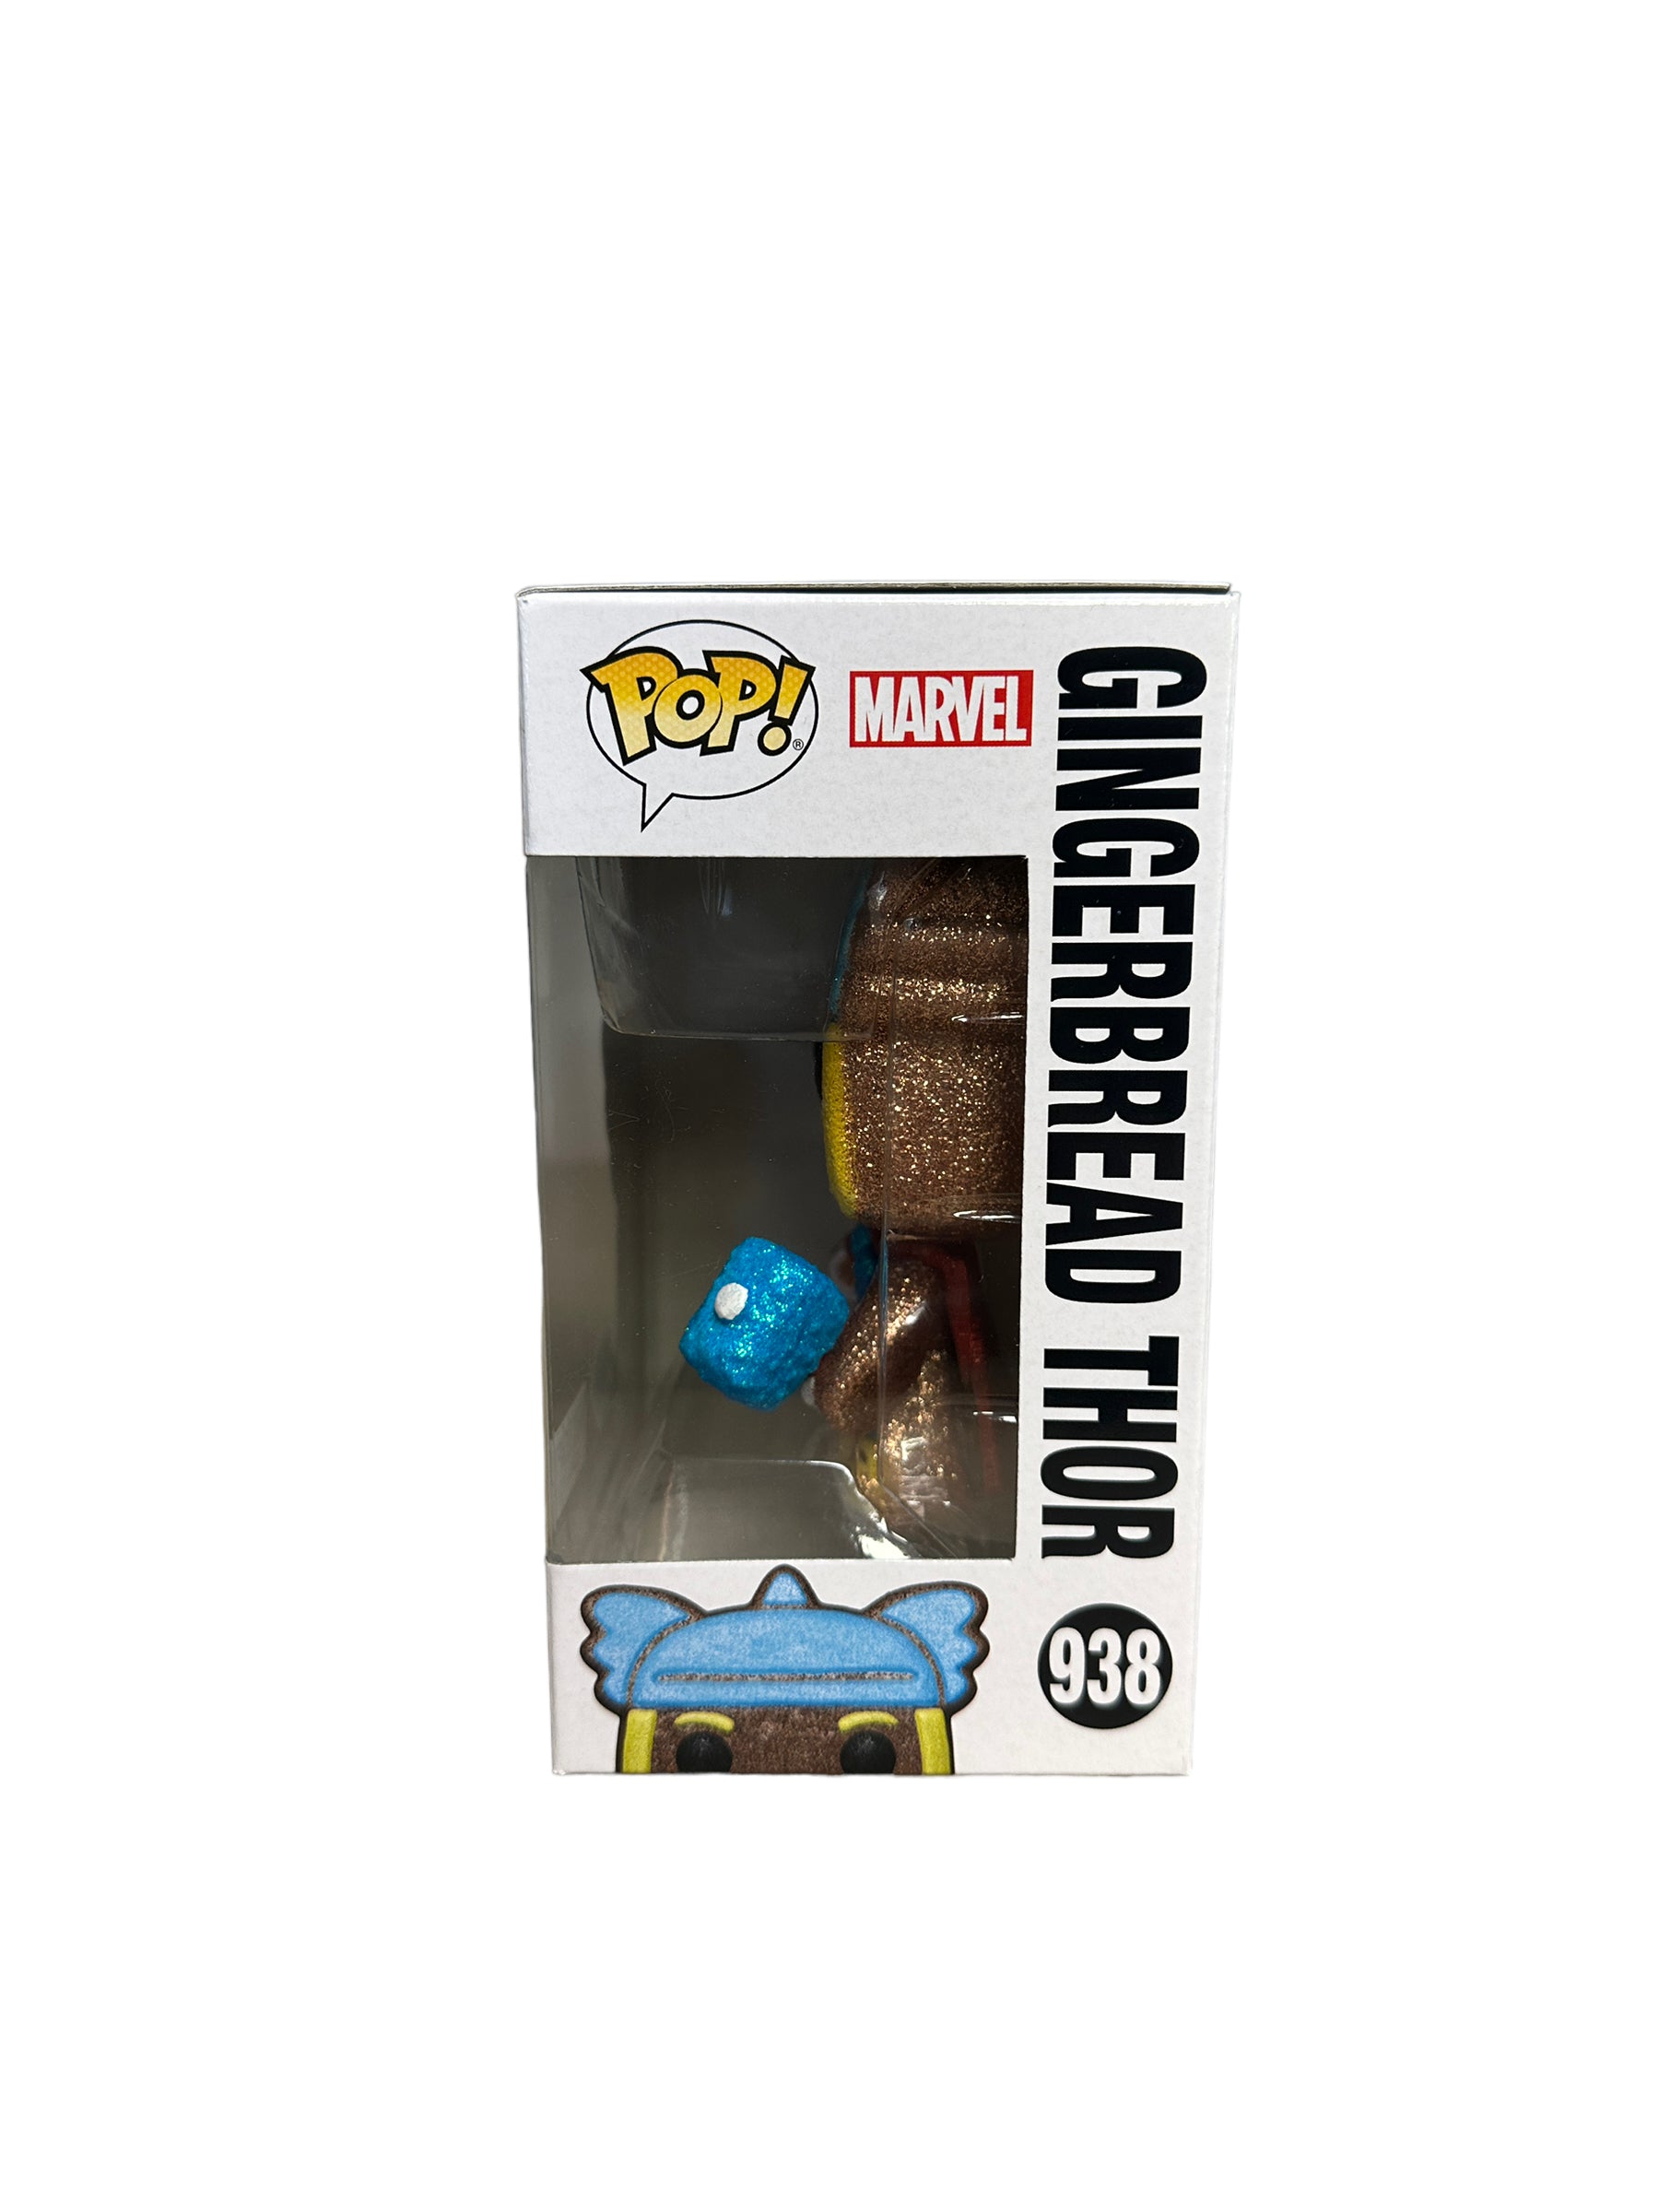 Gingerbread Thor #938 (Diamond Collection) Funko Pop! - Marvel - Hot Topic Exclusive - Condition 9.5/10